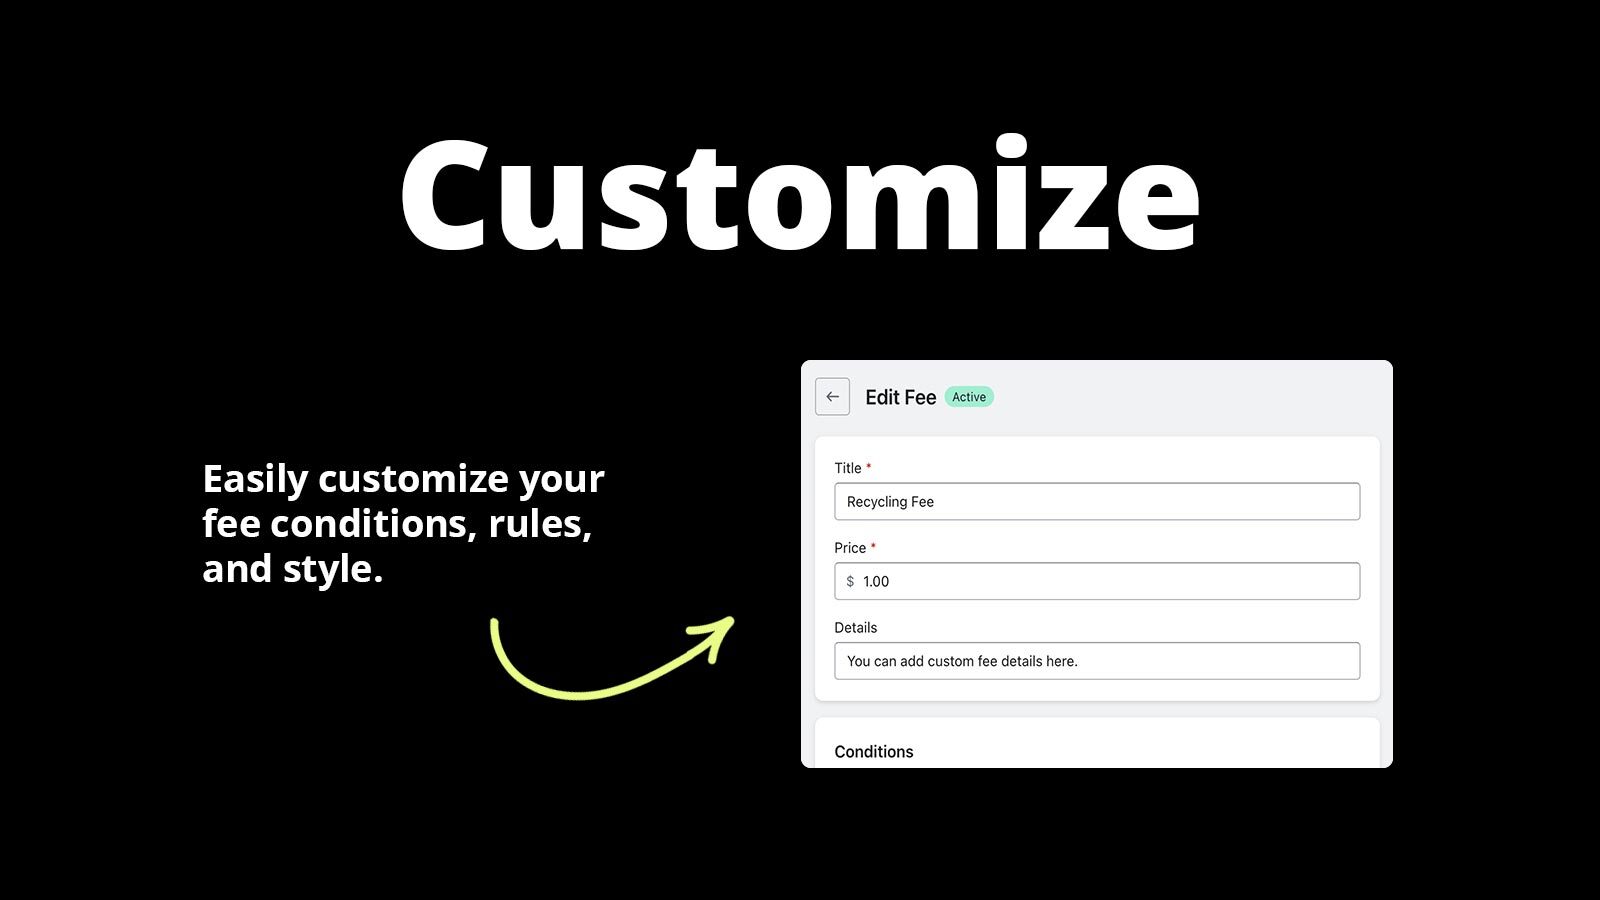 Easily customize your fee conditions, rules and style